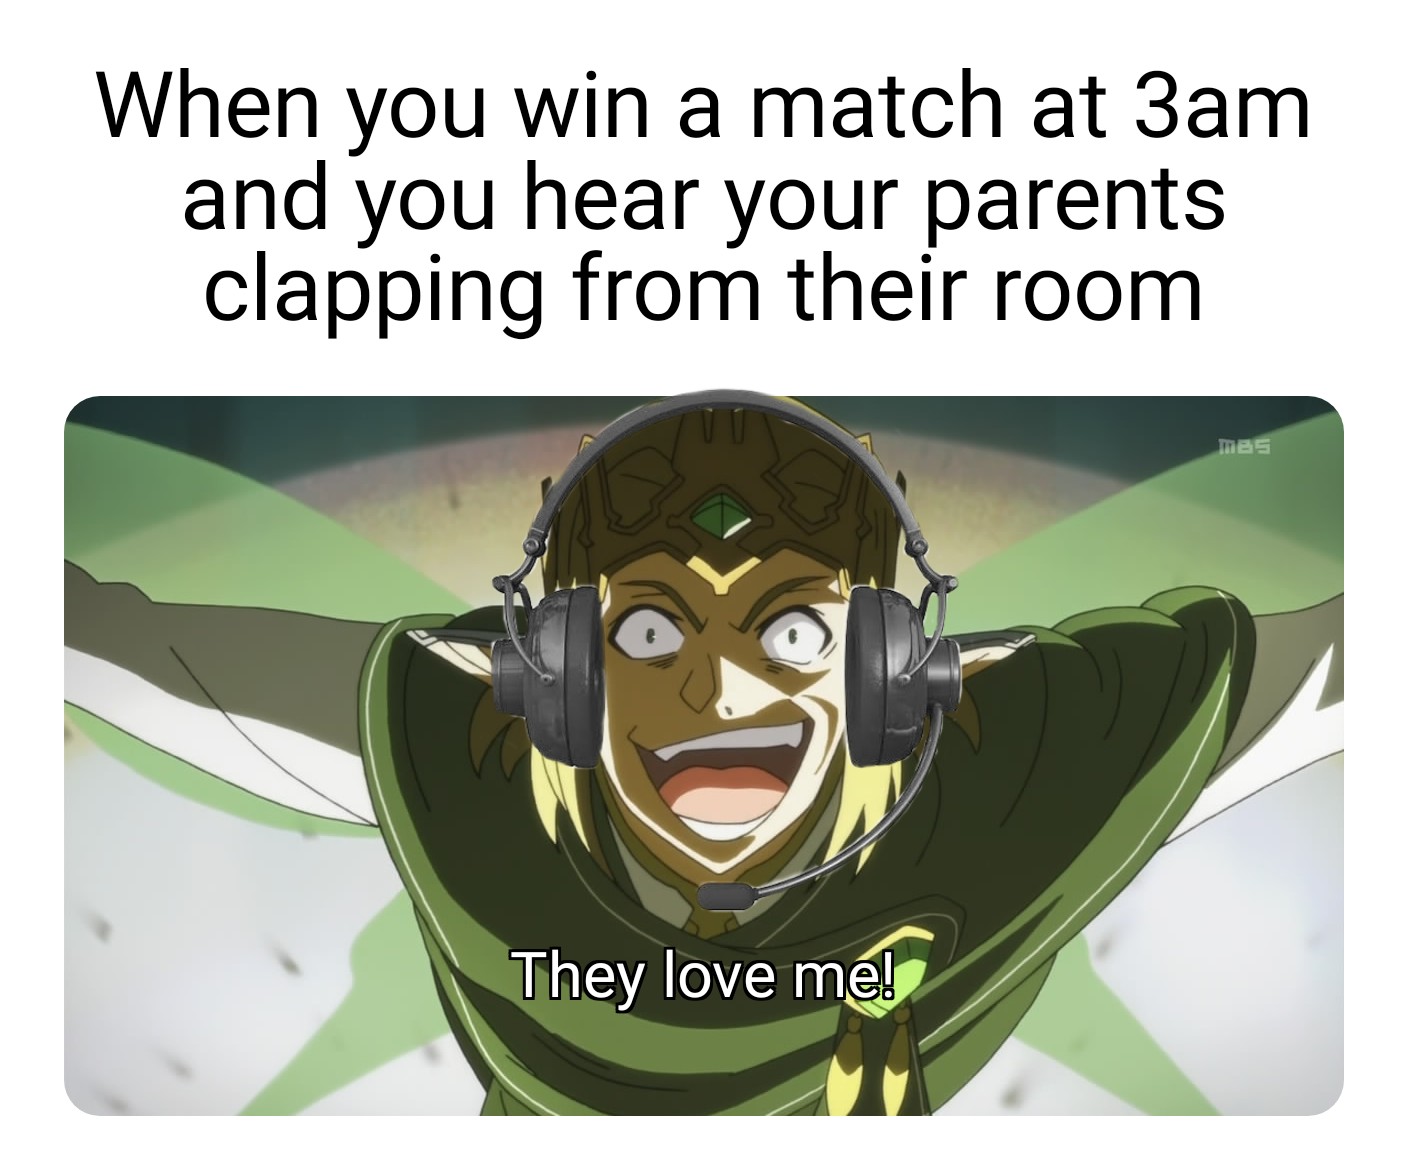 quotes and sayings - When you win a match at 3am and you hear your parents clapping from their room mes They love me!